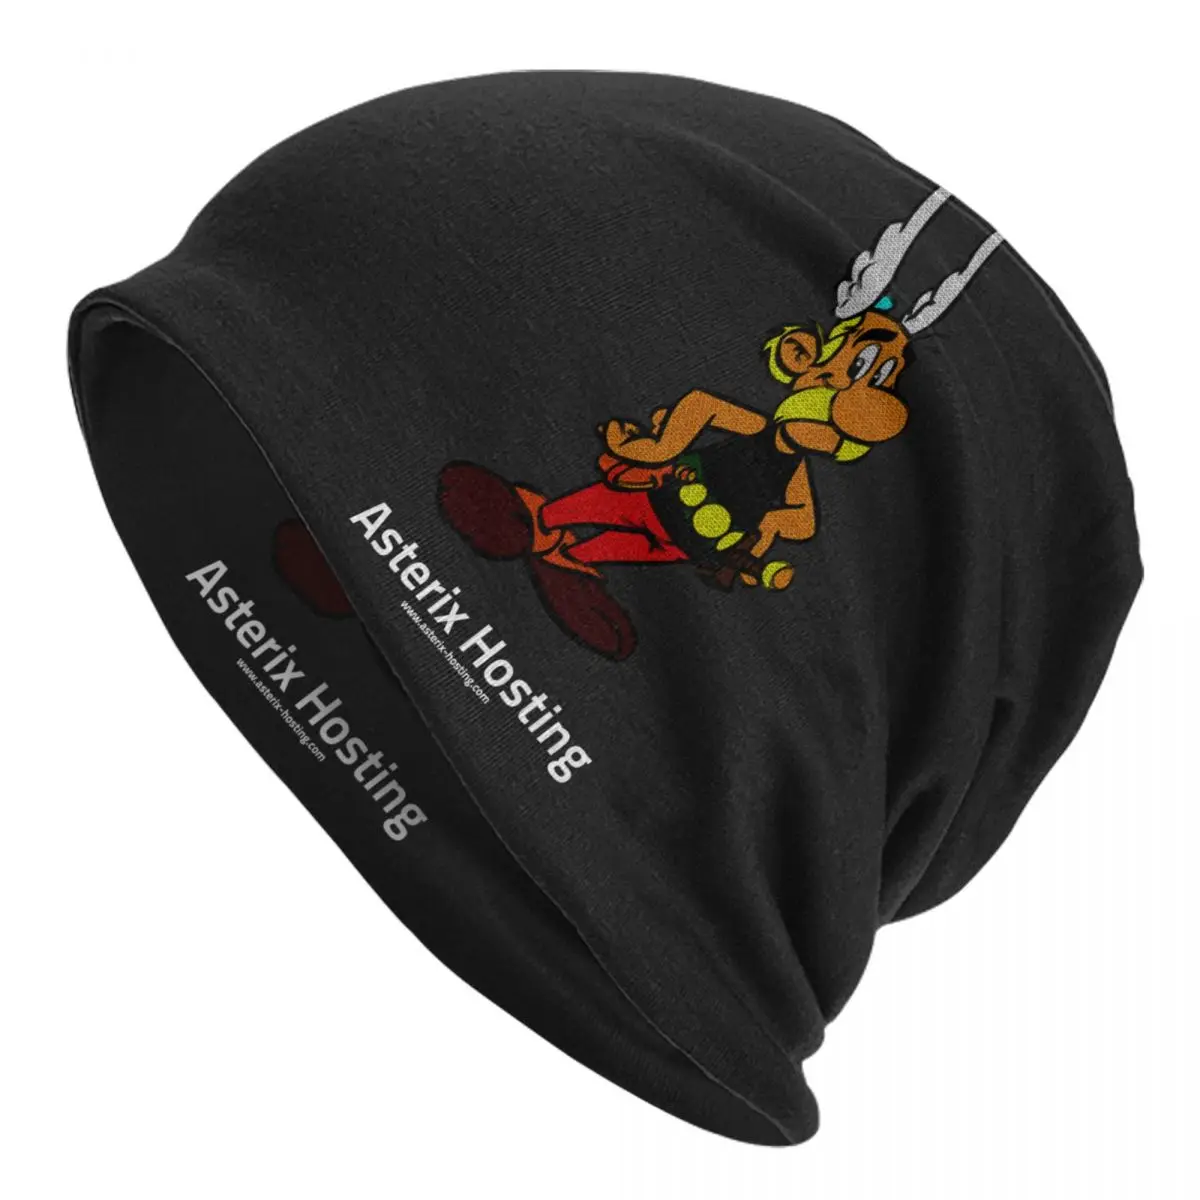 Asterix Obelix Adult Men's Women's Knit Hat Keep warm winter Funny knitted hat